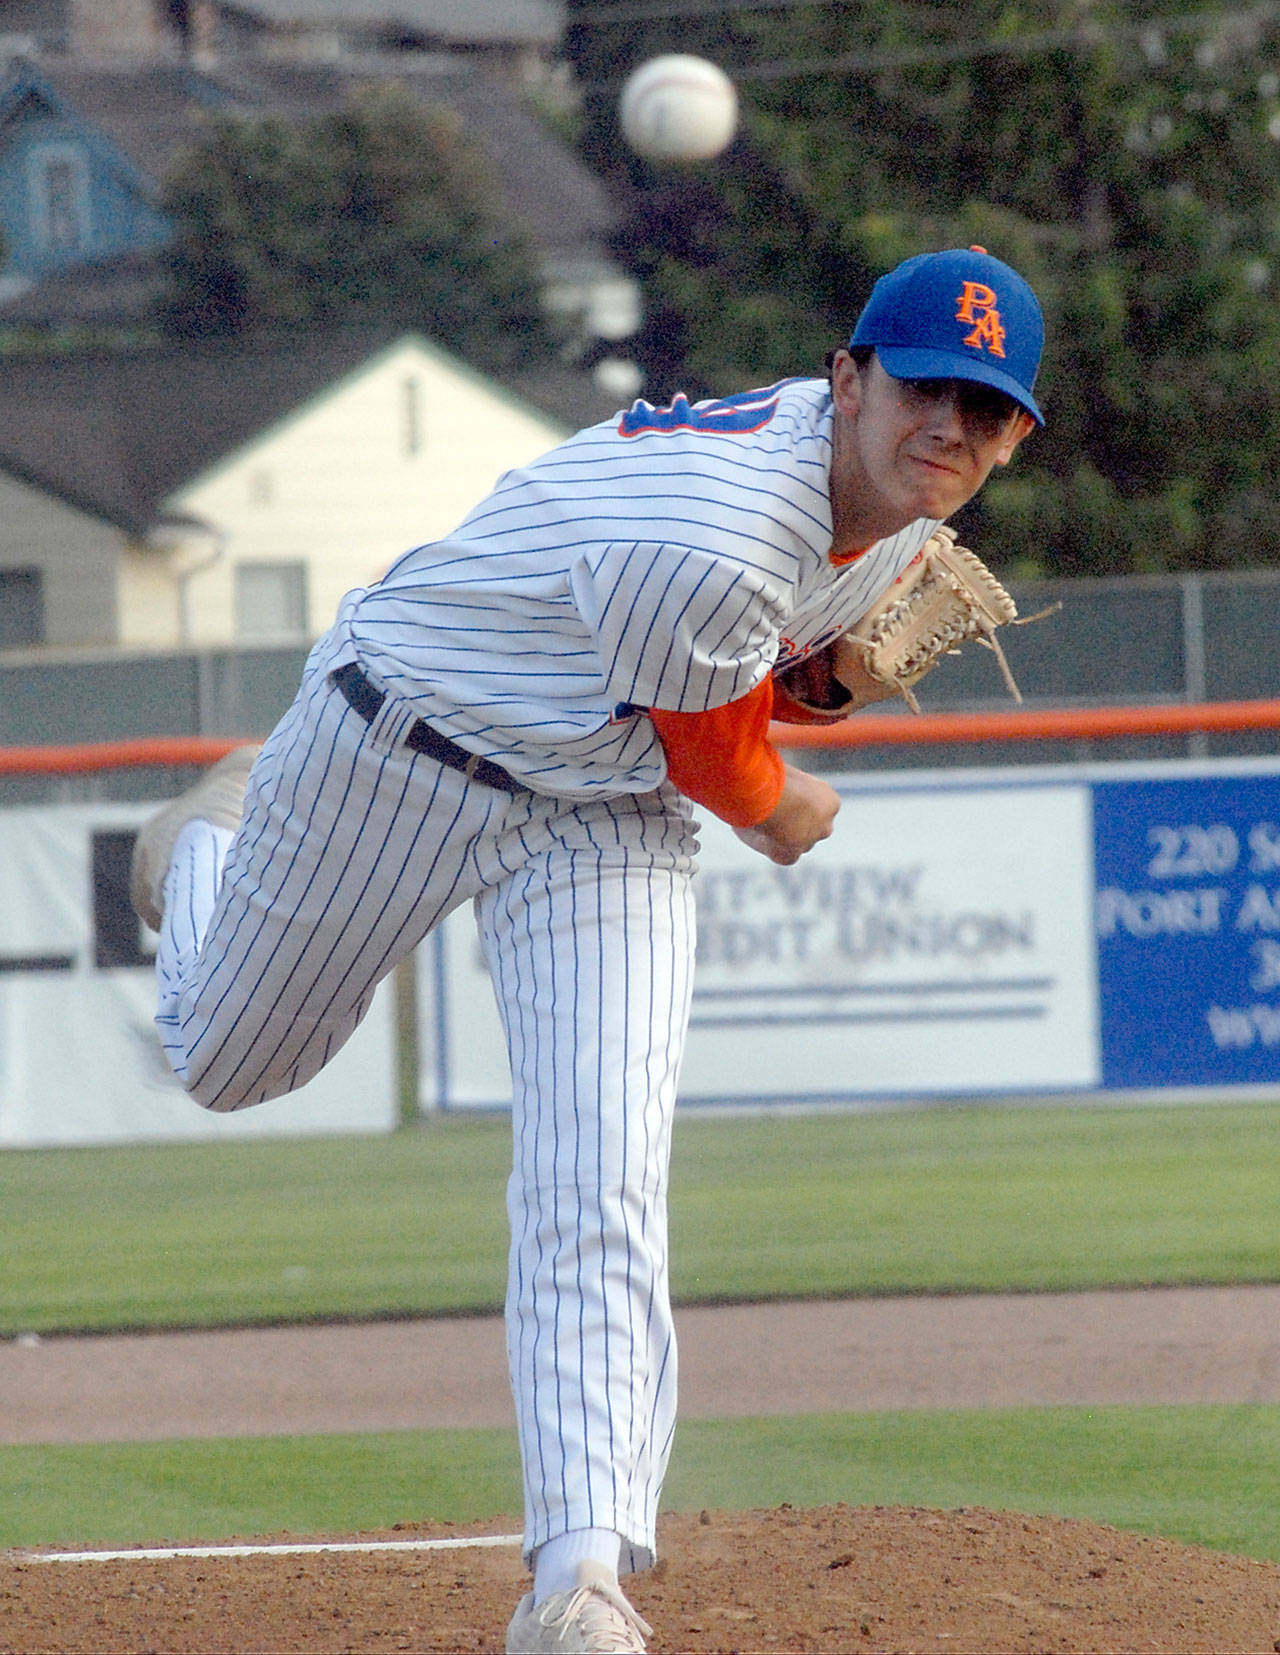 Keith Thorpe/Peninsula Daily News Lefties pitcher Jack Schlotman throws in the first inning of Friday night’s game against Portland at Port Angeles Civic Field.